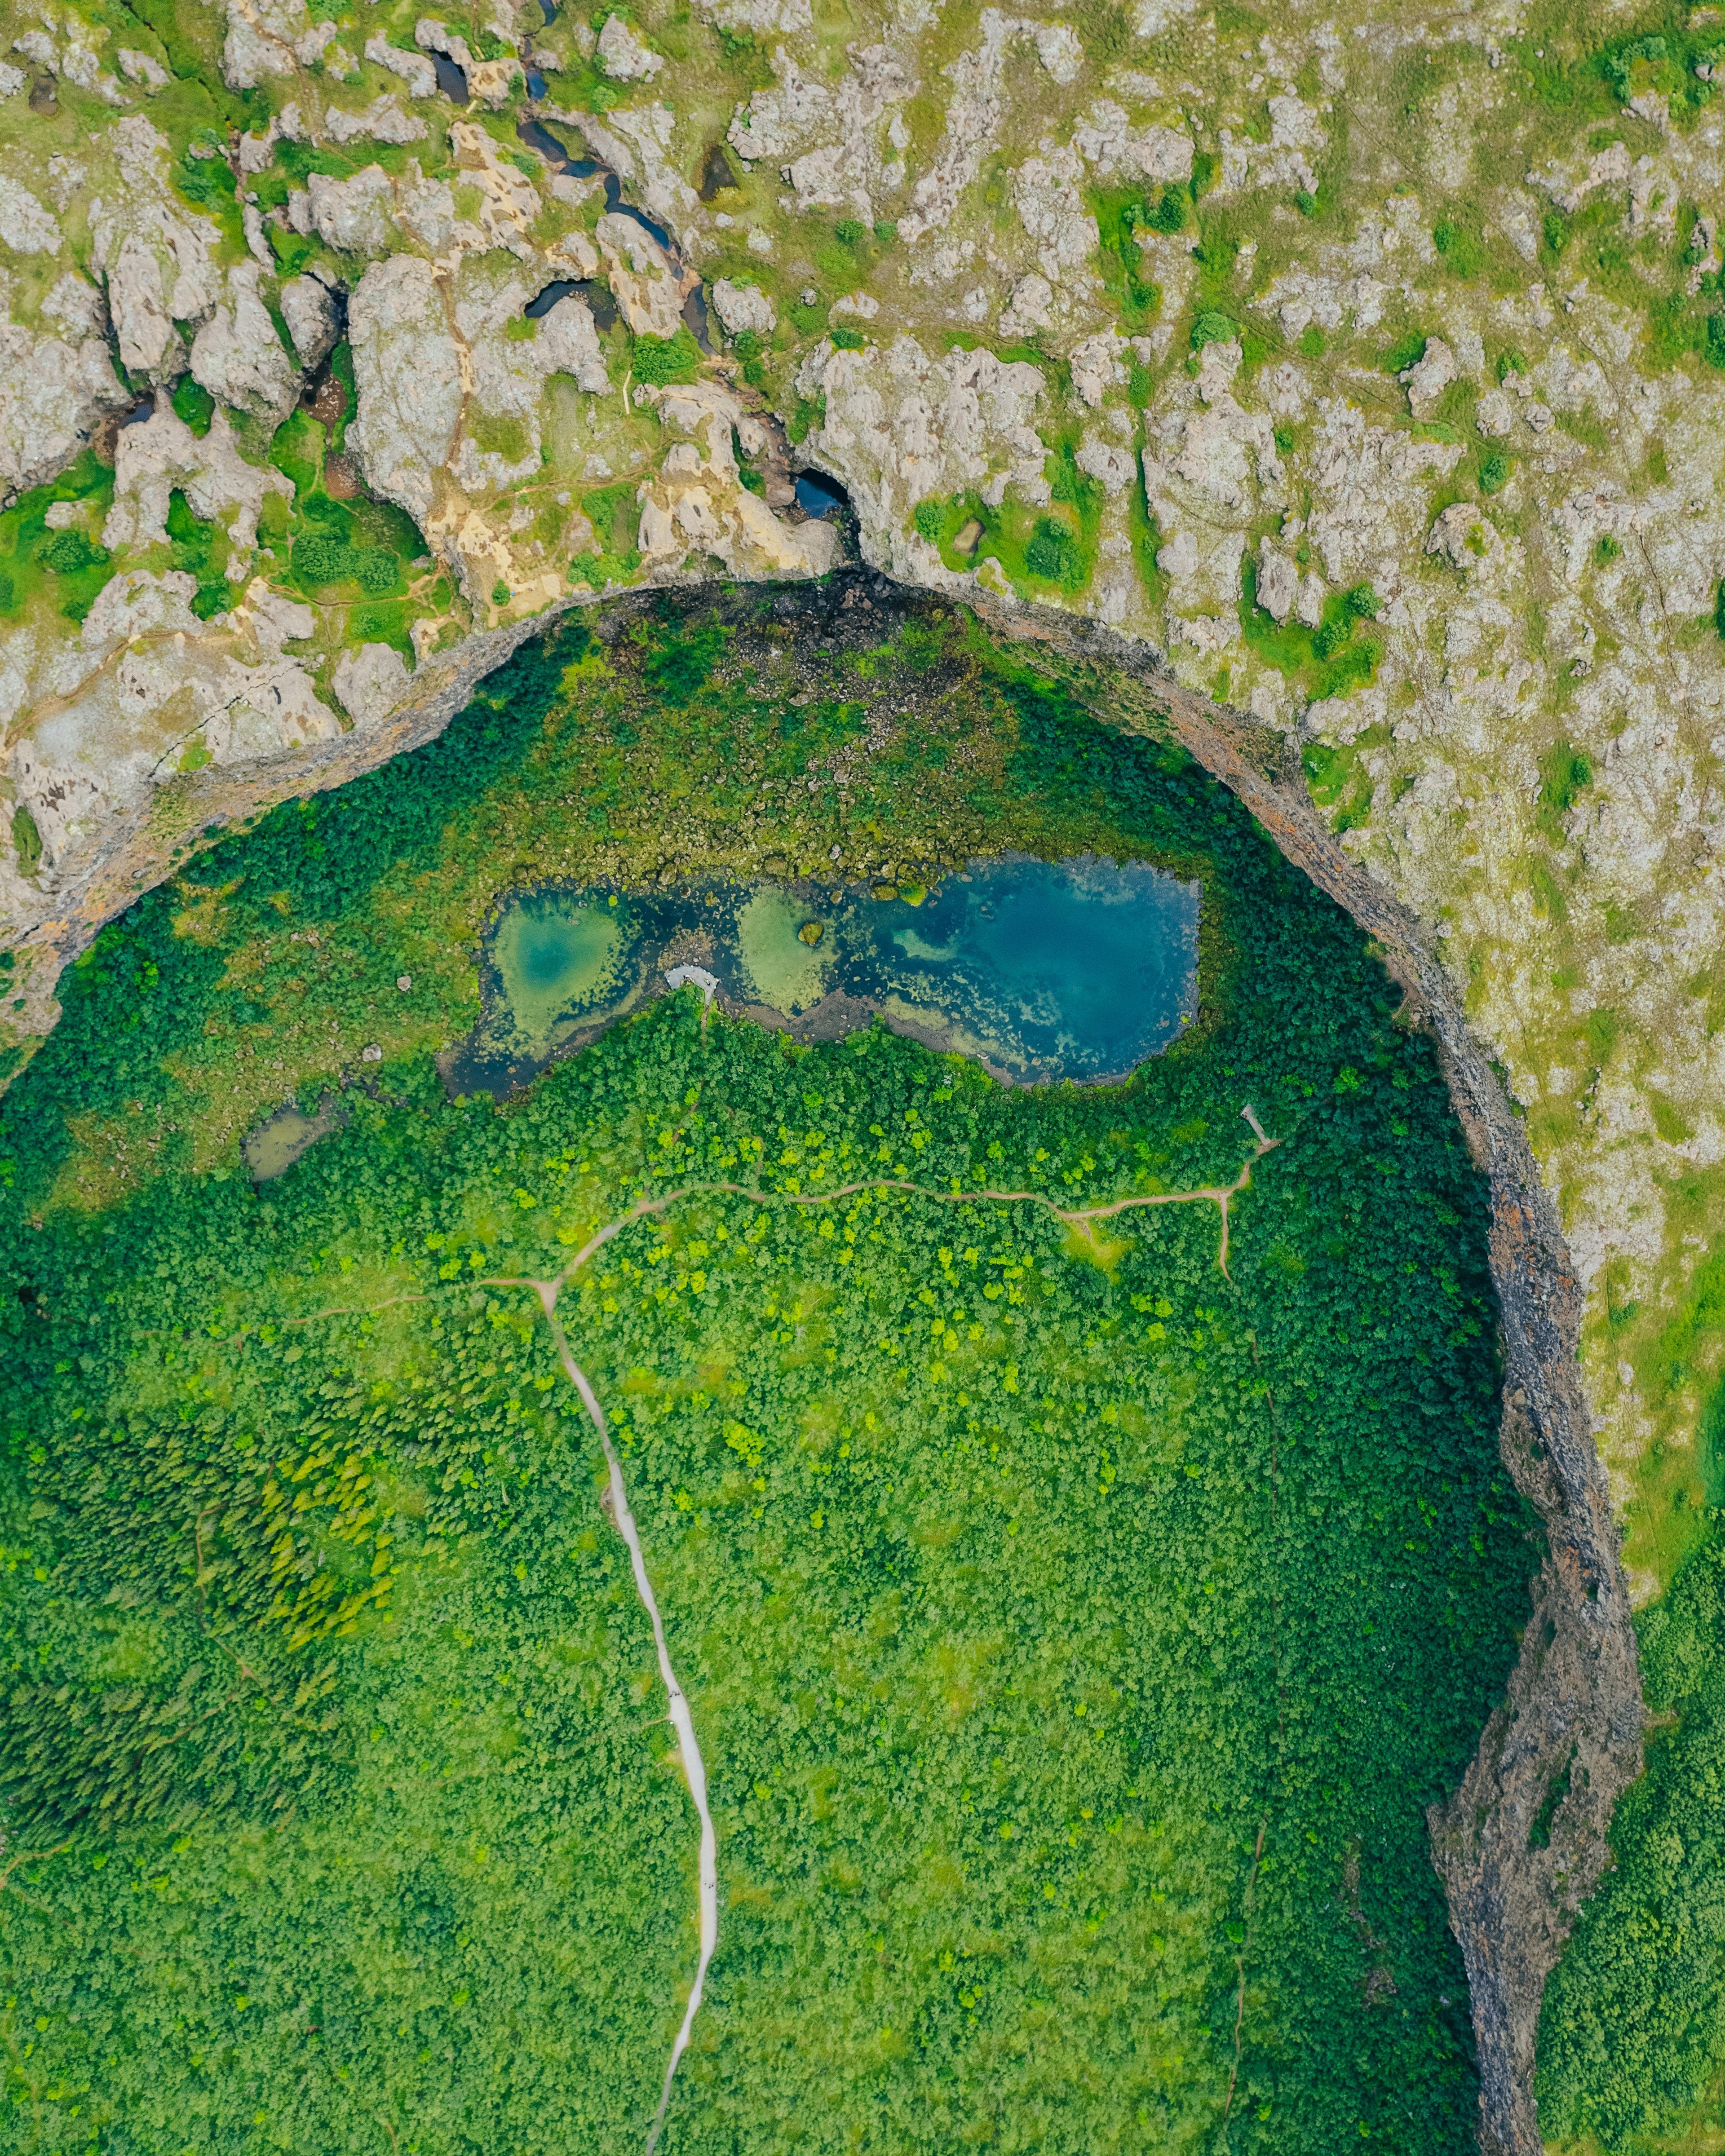 Overhead shot of Ásbyrgi Canyon's heart-shaped end, featuring twin ponds surrounded by vibrant green vegetation and rugged cliffs.